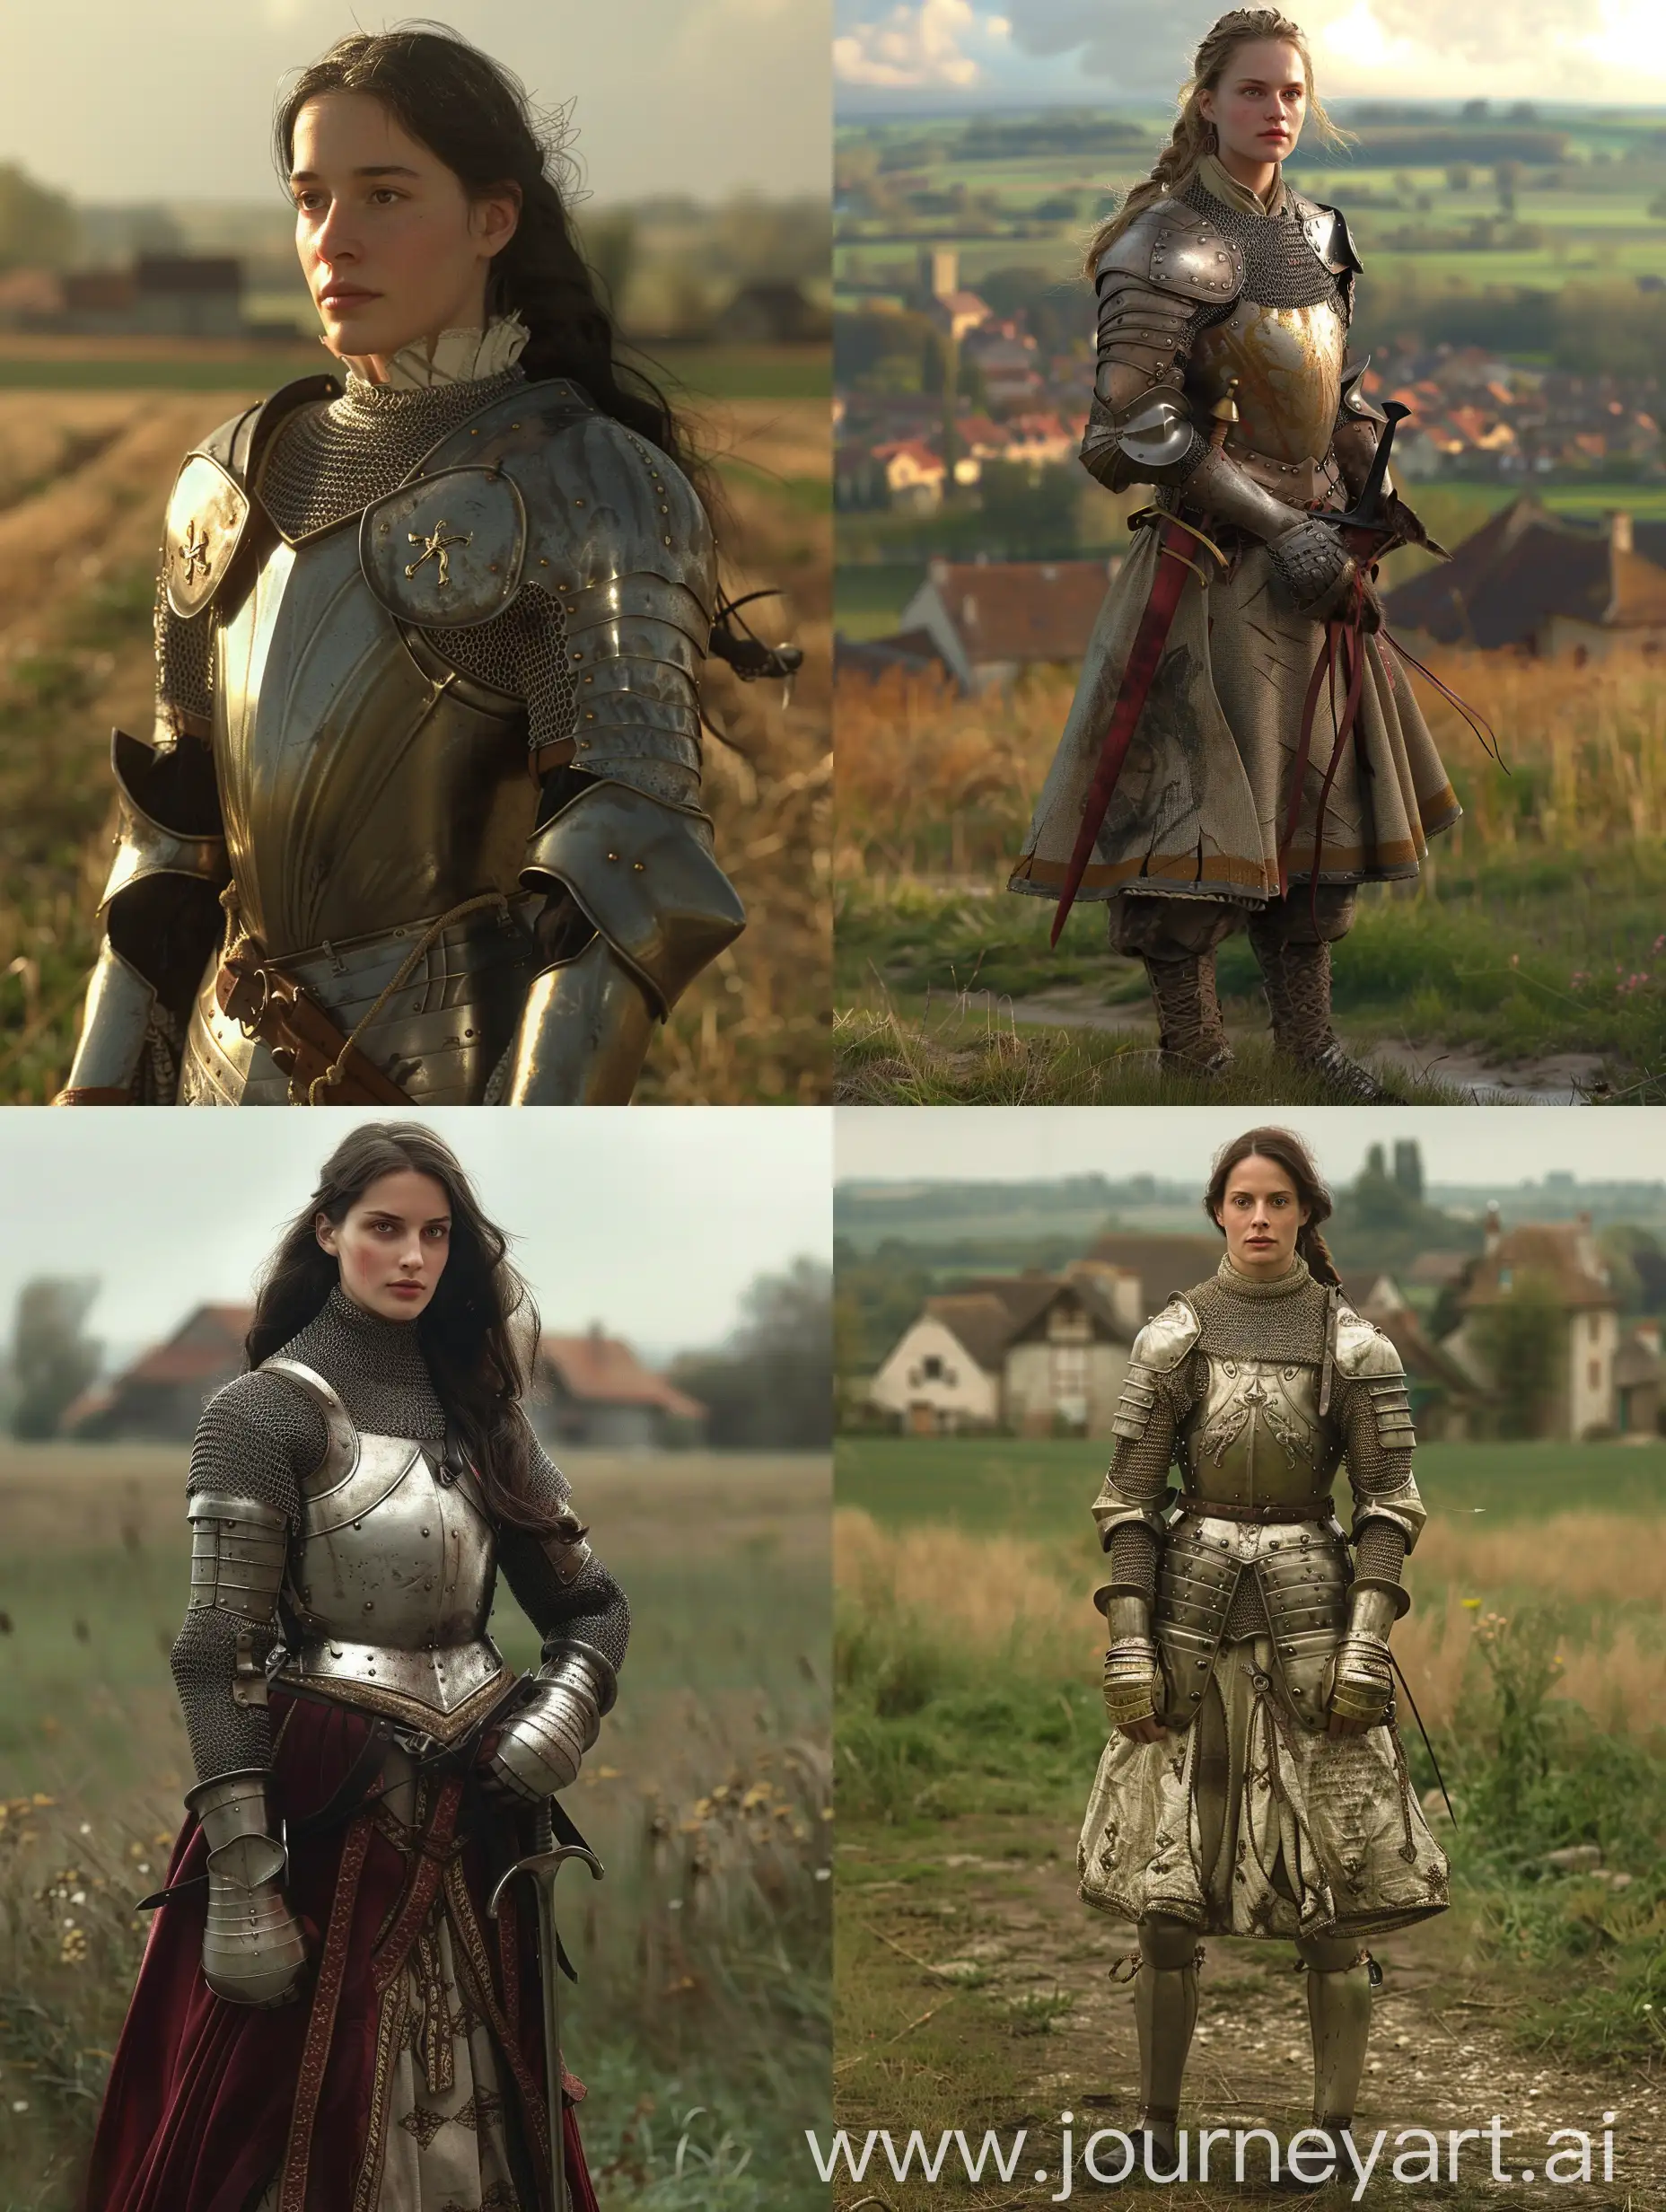 Characters: Joan of Arc, Description: Extraordinary Maid of Orleans, Time Period: Medieval, Clothing: Armor and traditional attire, Location: French countryside, Action: Standing confidently, Background: Fields or village, Shot Type: Medium shot, Style: Hyper-realistic photo realism, cinematography.